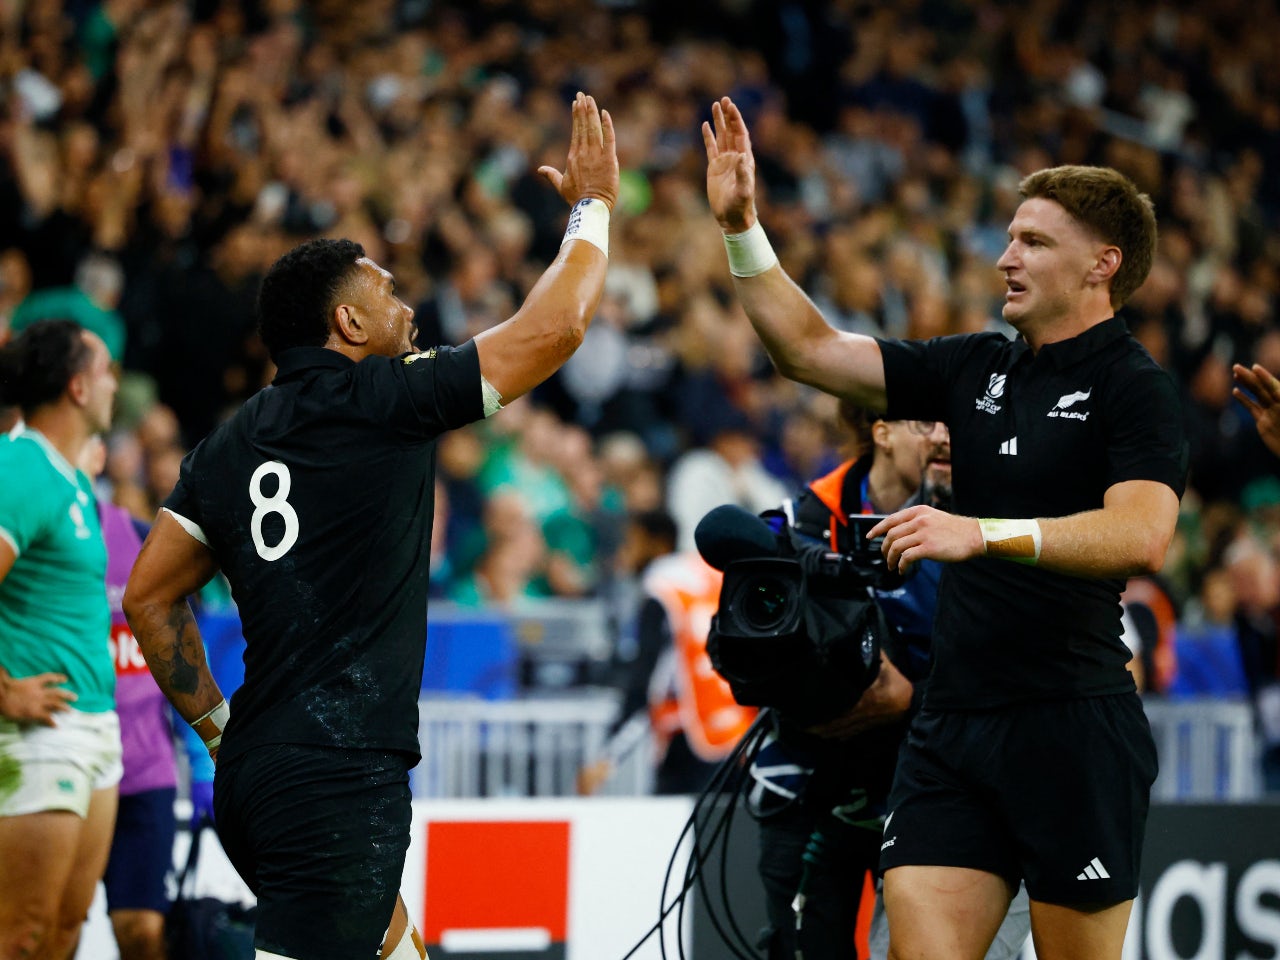 Ireland's quarter-final curse continues in absorbing New Zealand defeat